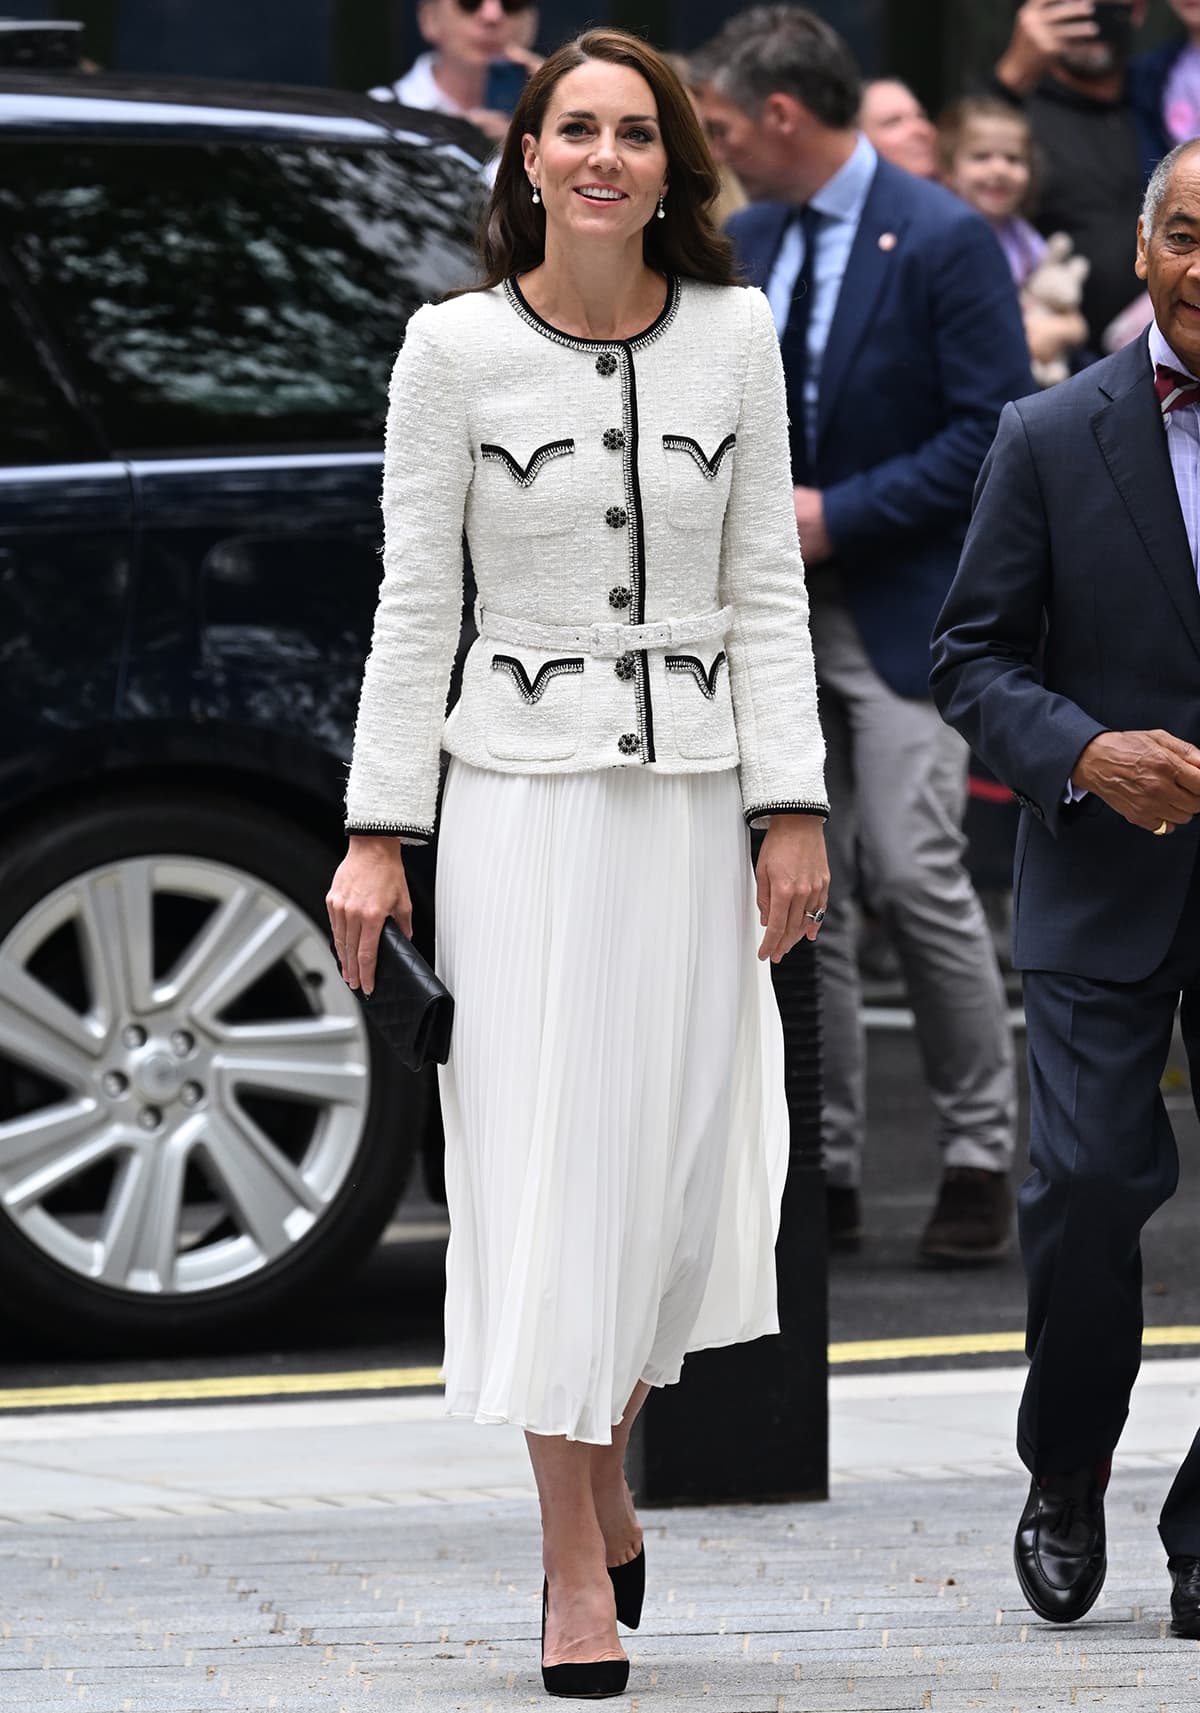 Kate Middleton is the definition of elegance in a white Self-Portrait boucle jacket and chiffon dress and black Aquazzura pumps at the reopening of the National Portrait Gallery on June 20, 2023